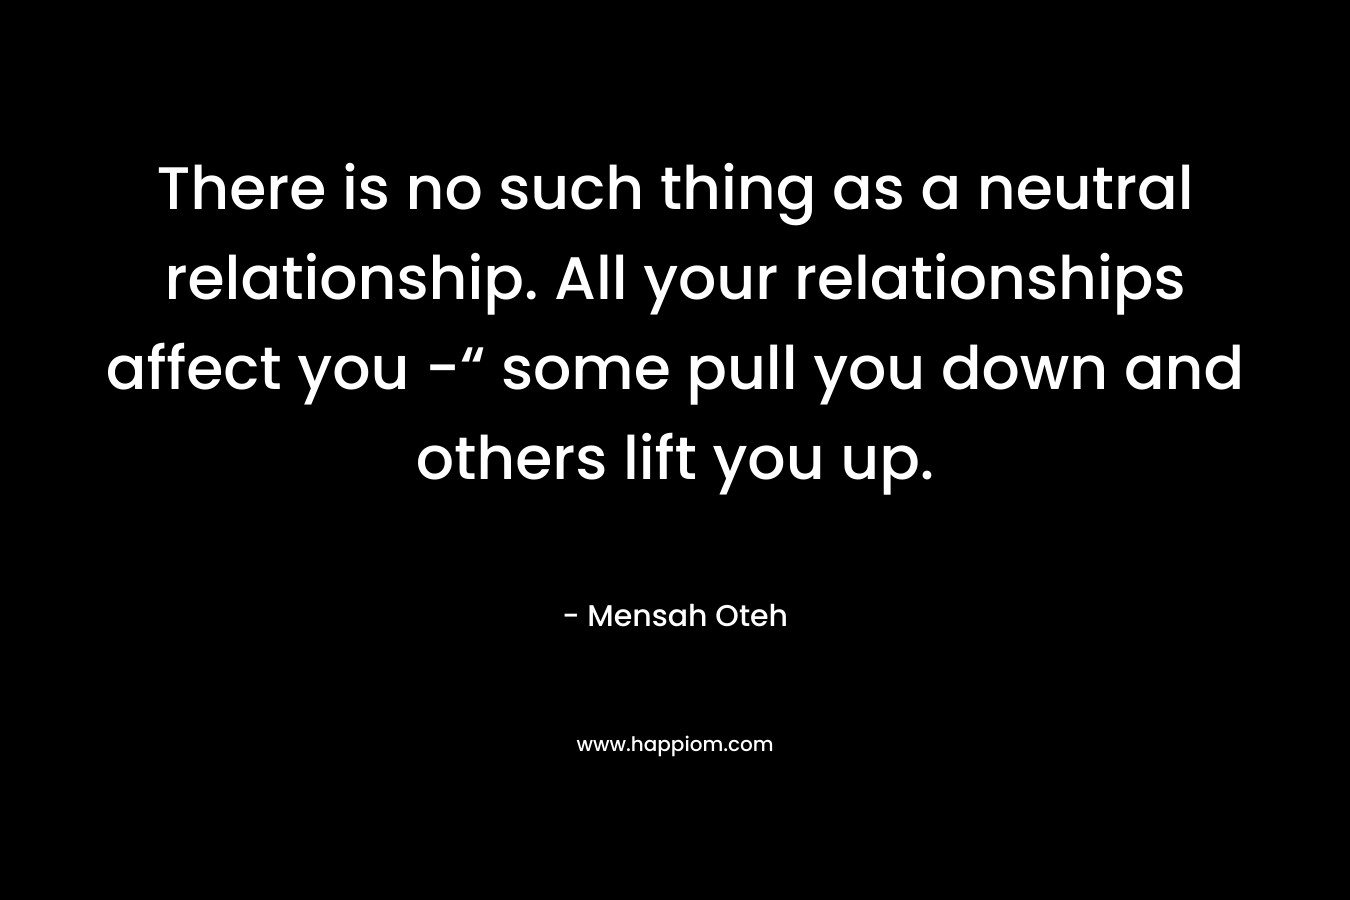 There is no such thing as a neutral relationship. All your relationships affect you -“ some pull you down and others lift you up. – Mensah Oteh